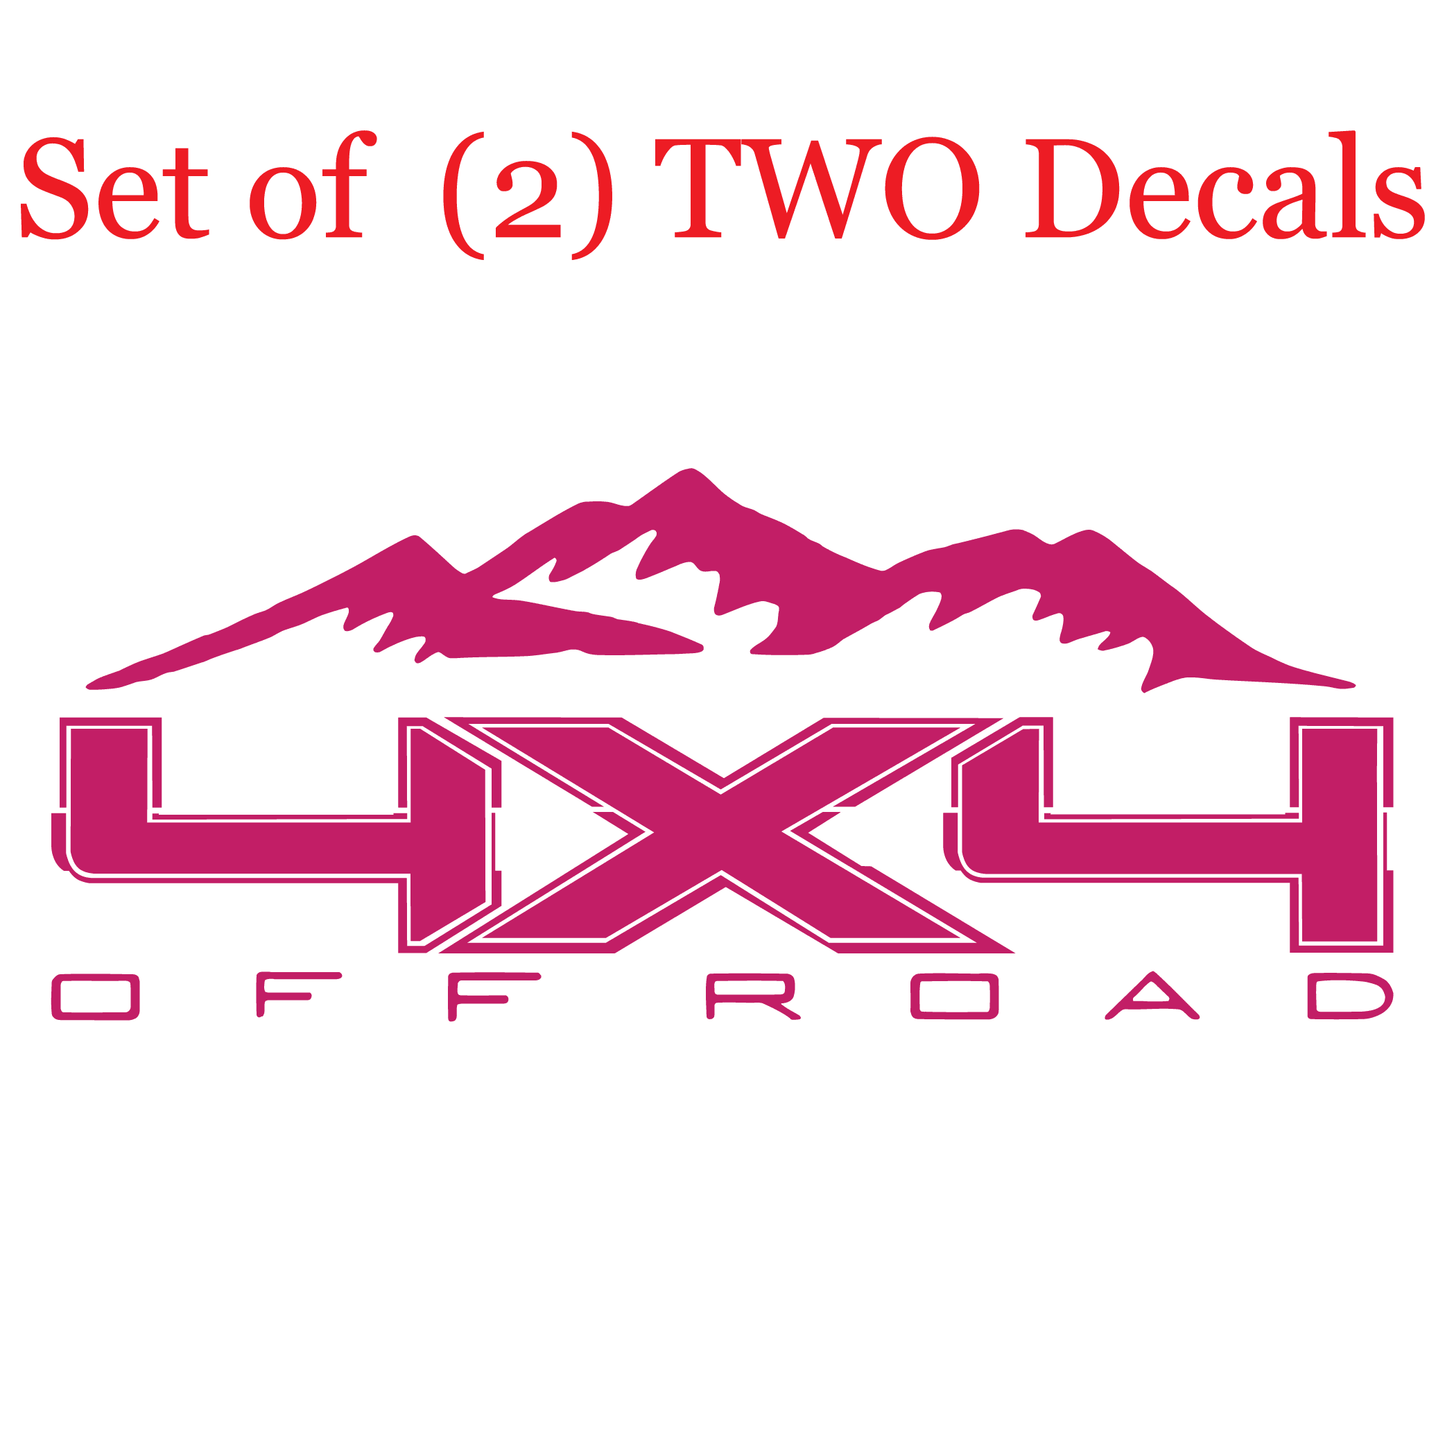 Shop Vinyl Design F-150 F-250 Trucks Replacement Bedside Decals Mountain 4 x 4 Off Road #09 Vehicle decal 001 Hot Pink Gloss Shop Vinyl Design decals stickers